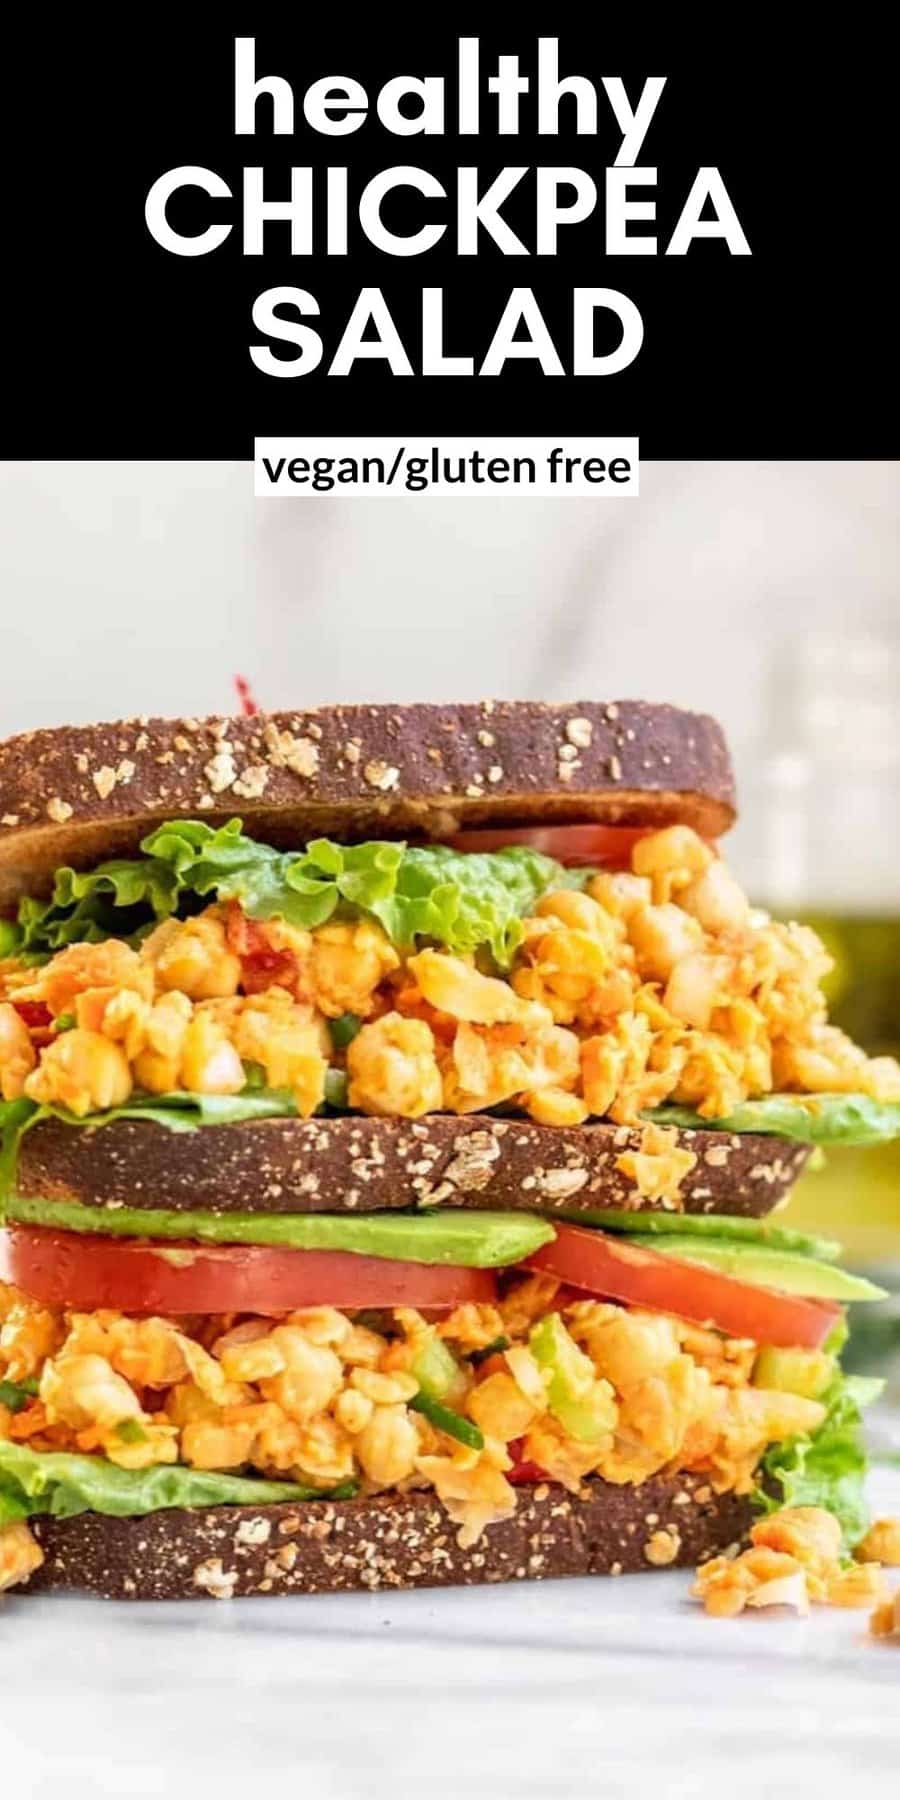 Spicy Vegan Chickpea Salad - Eat With Clarity